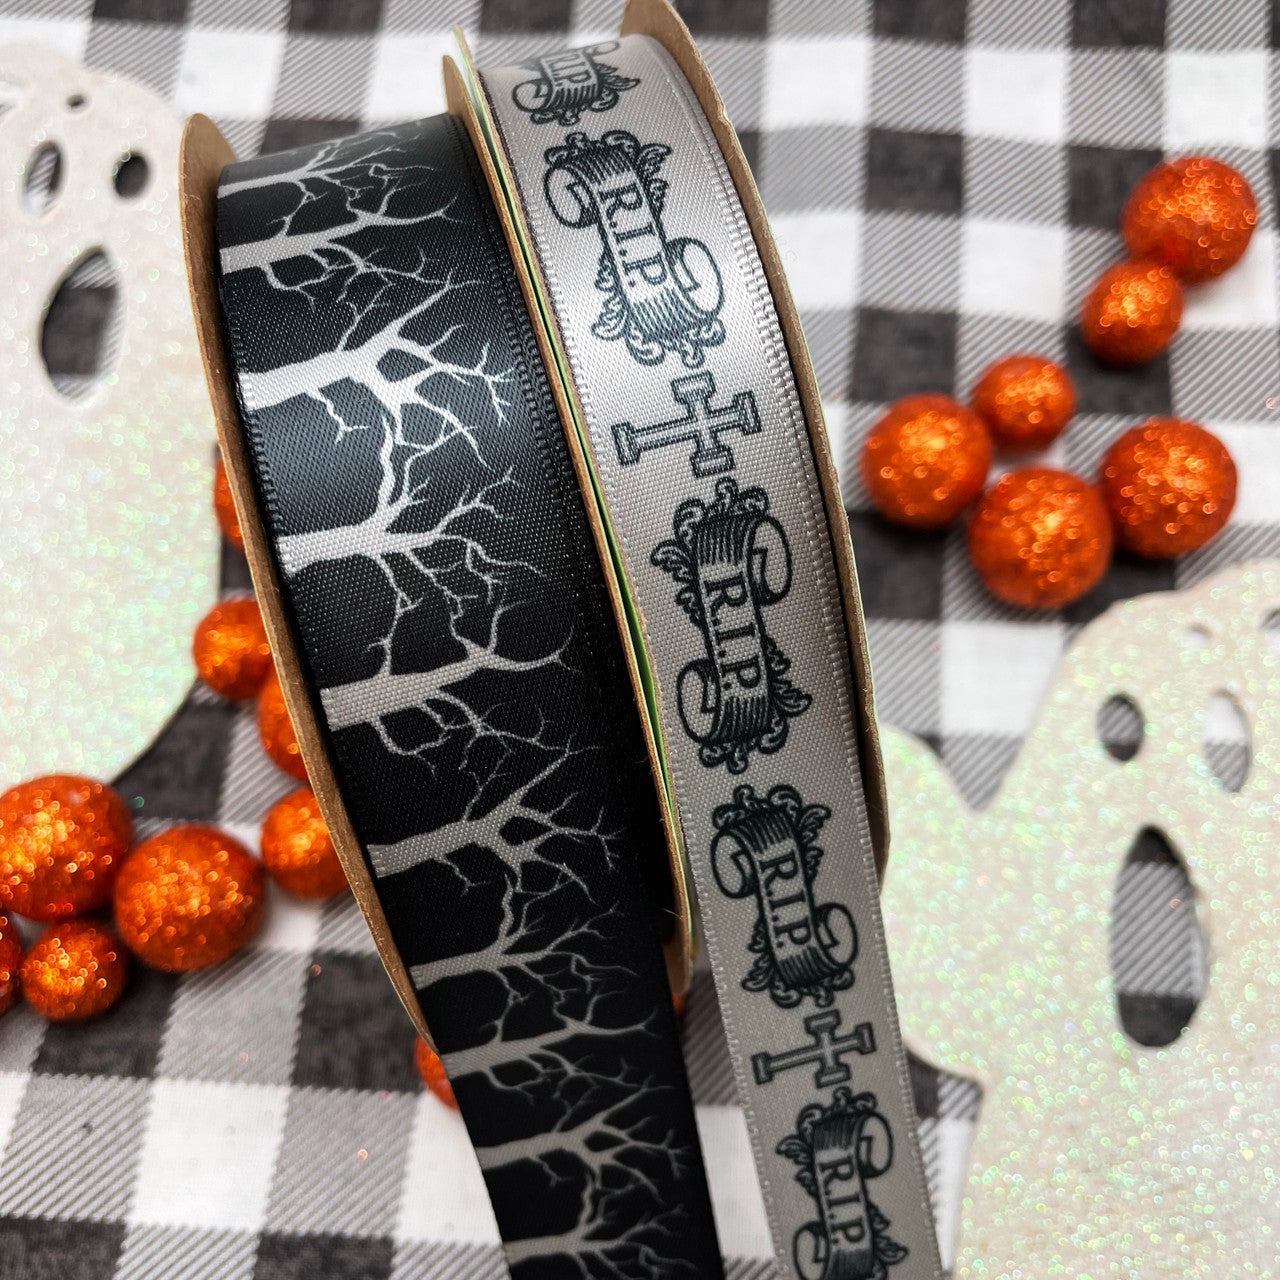 Pair our spooky trees ribbon with our RIP ribbon for a truly fun Halloween decor mix and match!